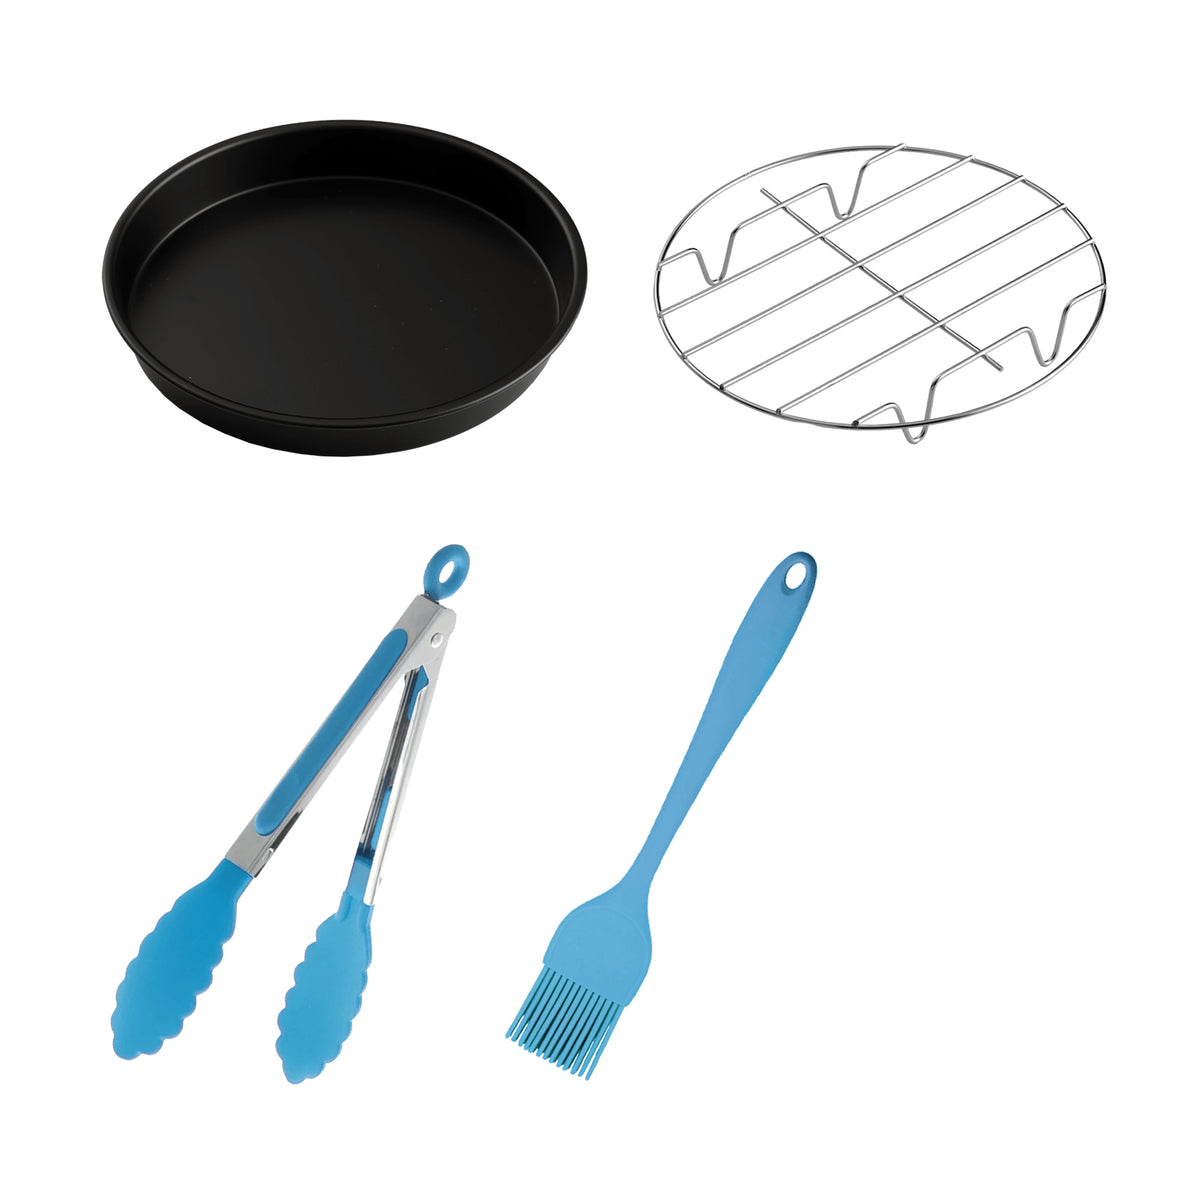 Grilling Set for an air fryer including the grill pan, wire rack and blue silicone tongs and brush .